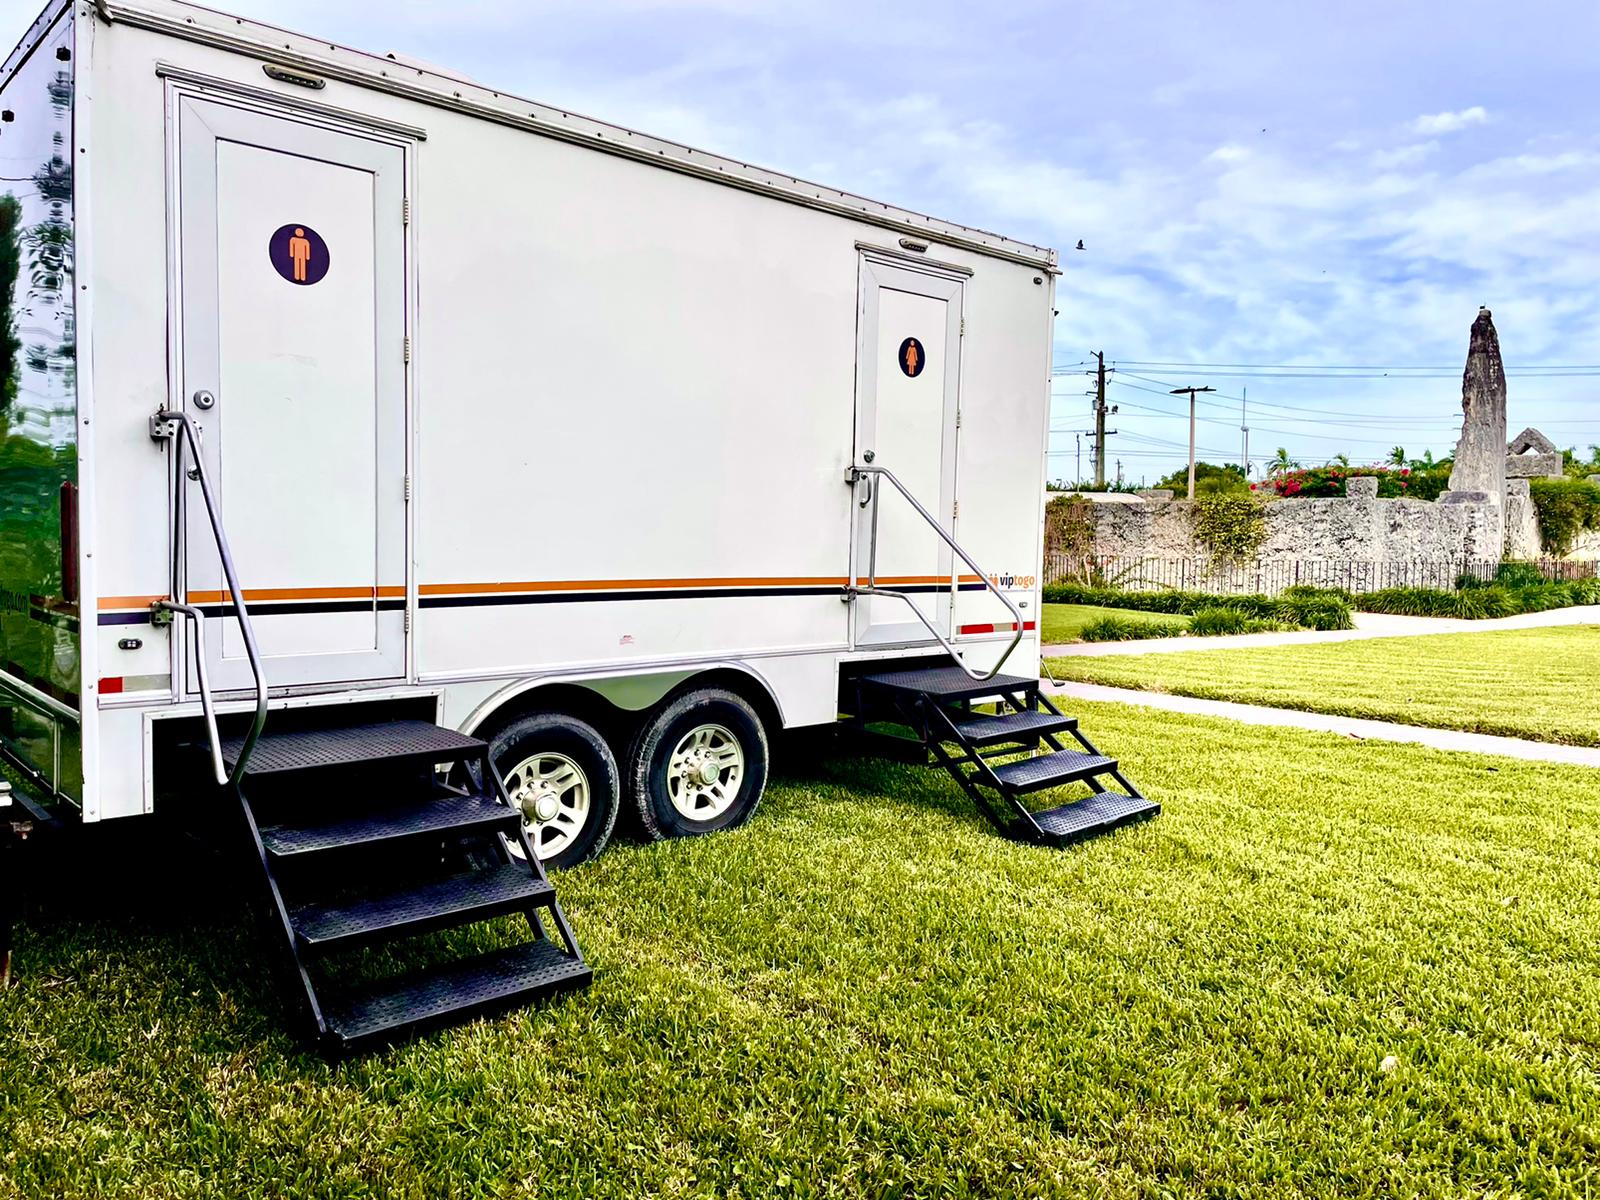 Eight Station Restroom Trailer, at an outdoor event